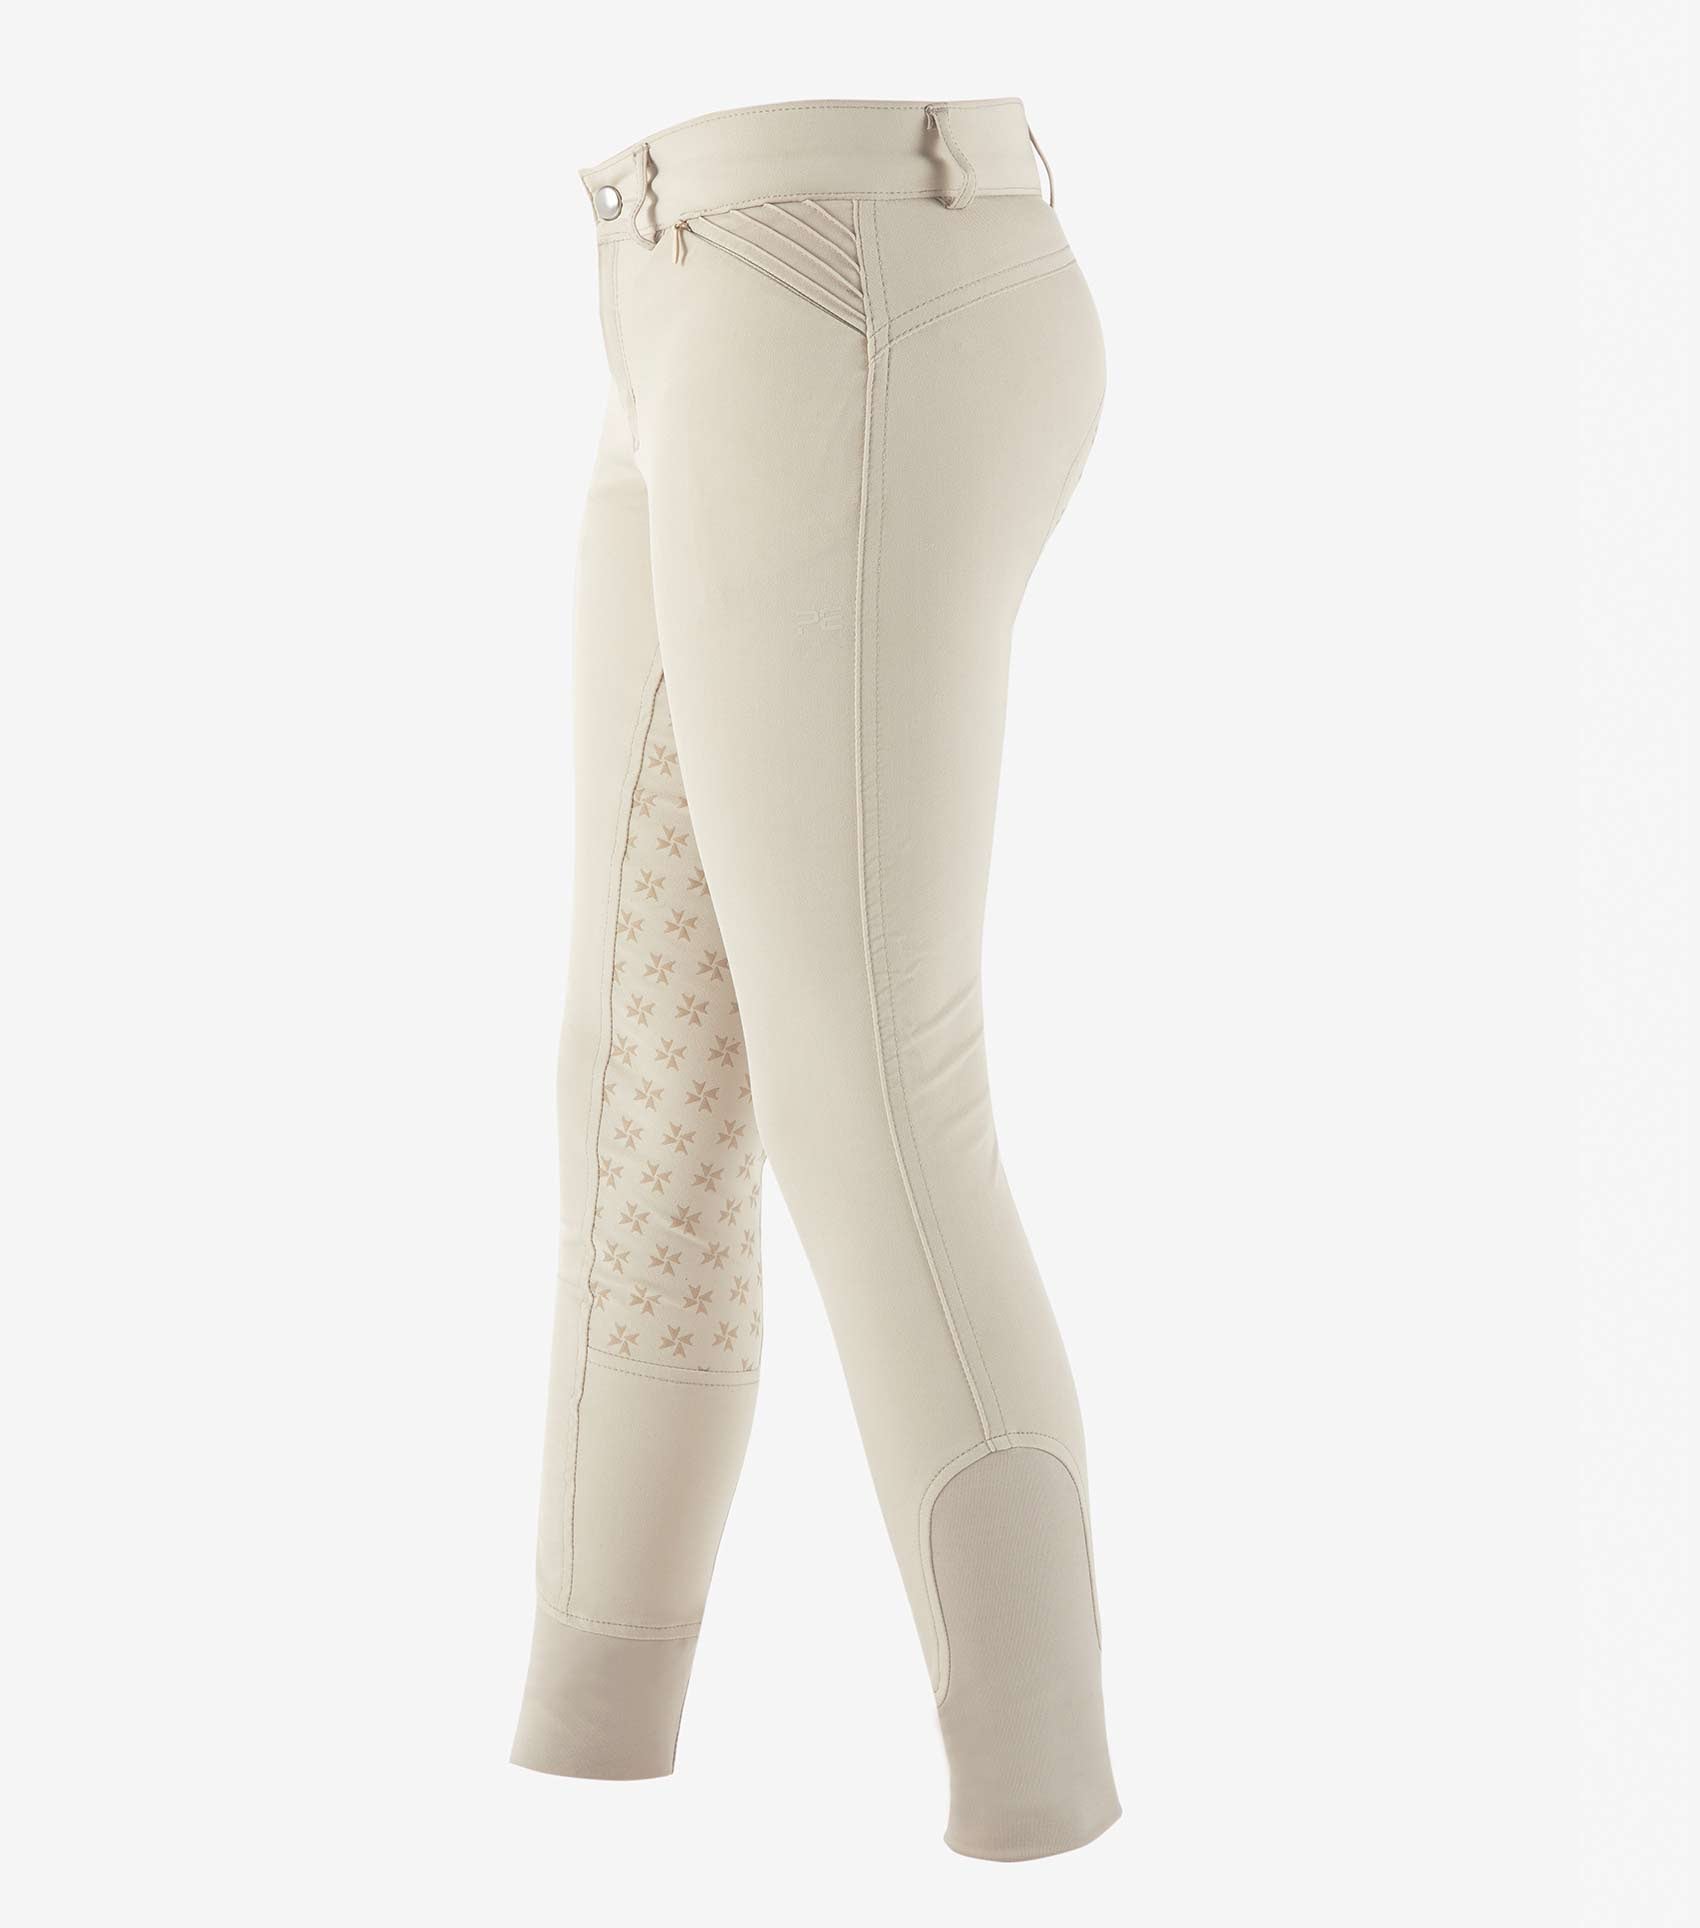 PE - Kids Full Seat Competition Breeches